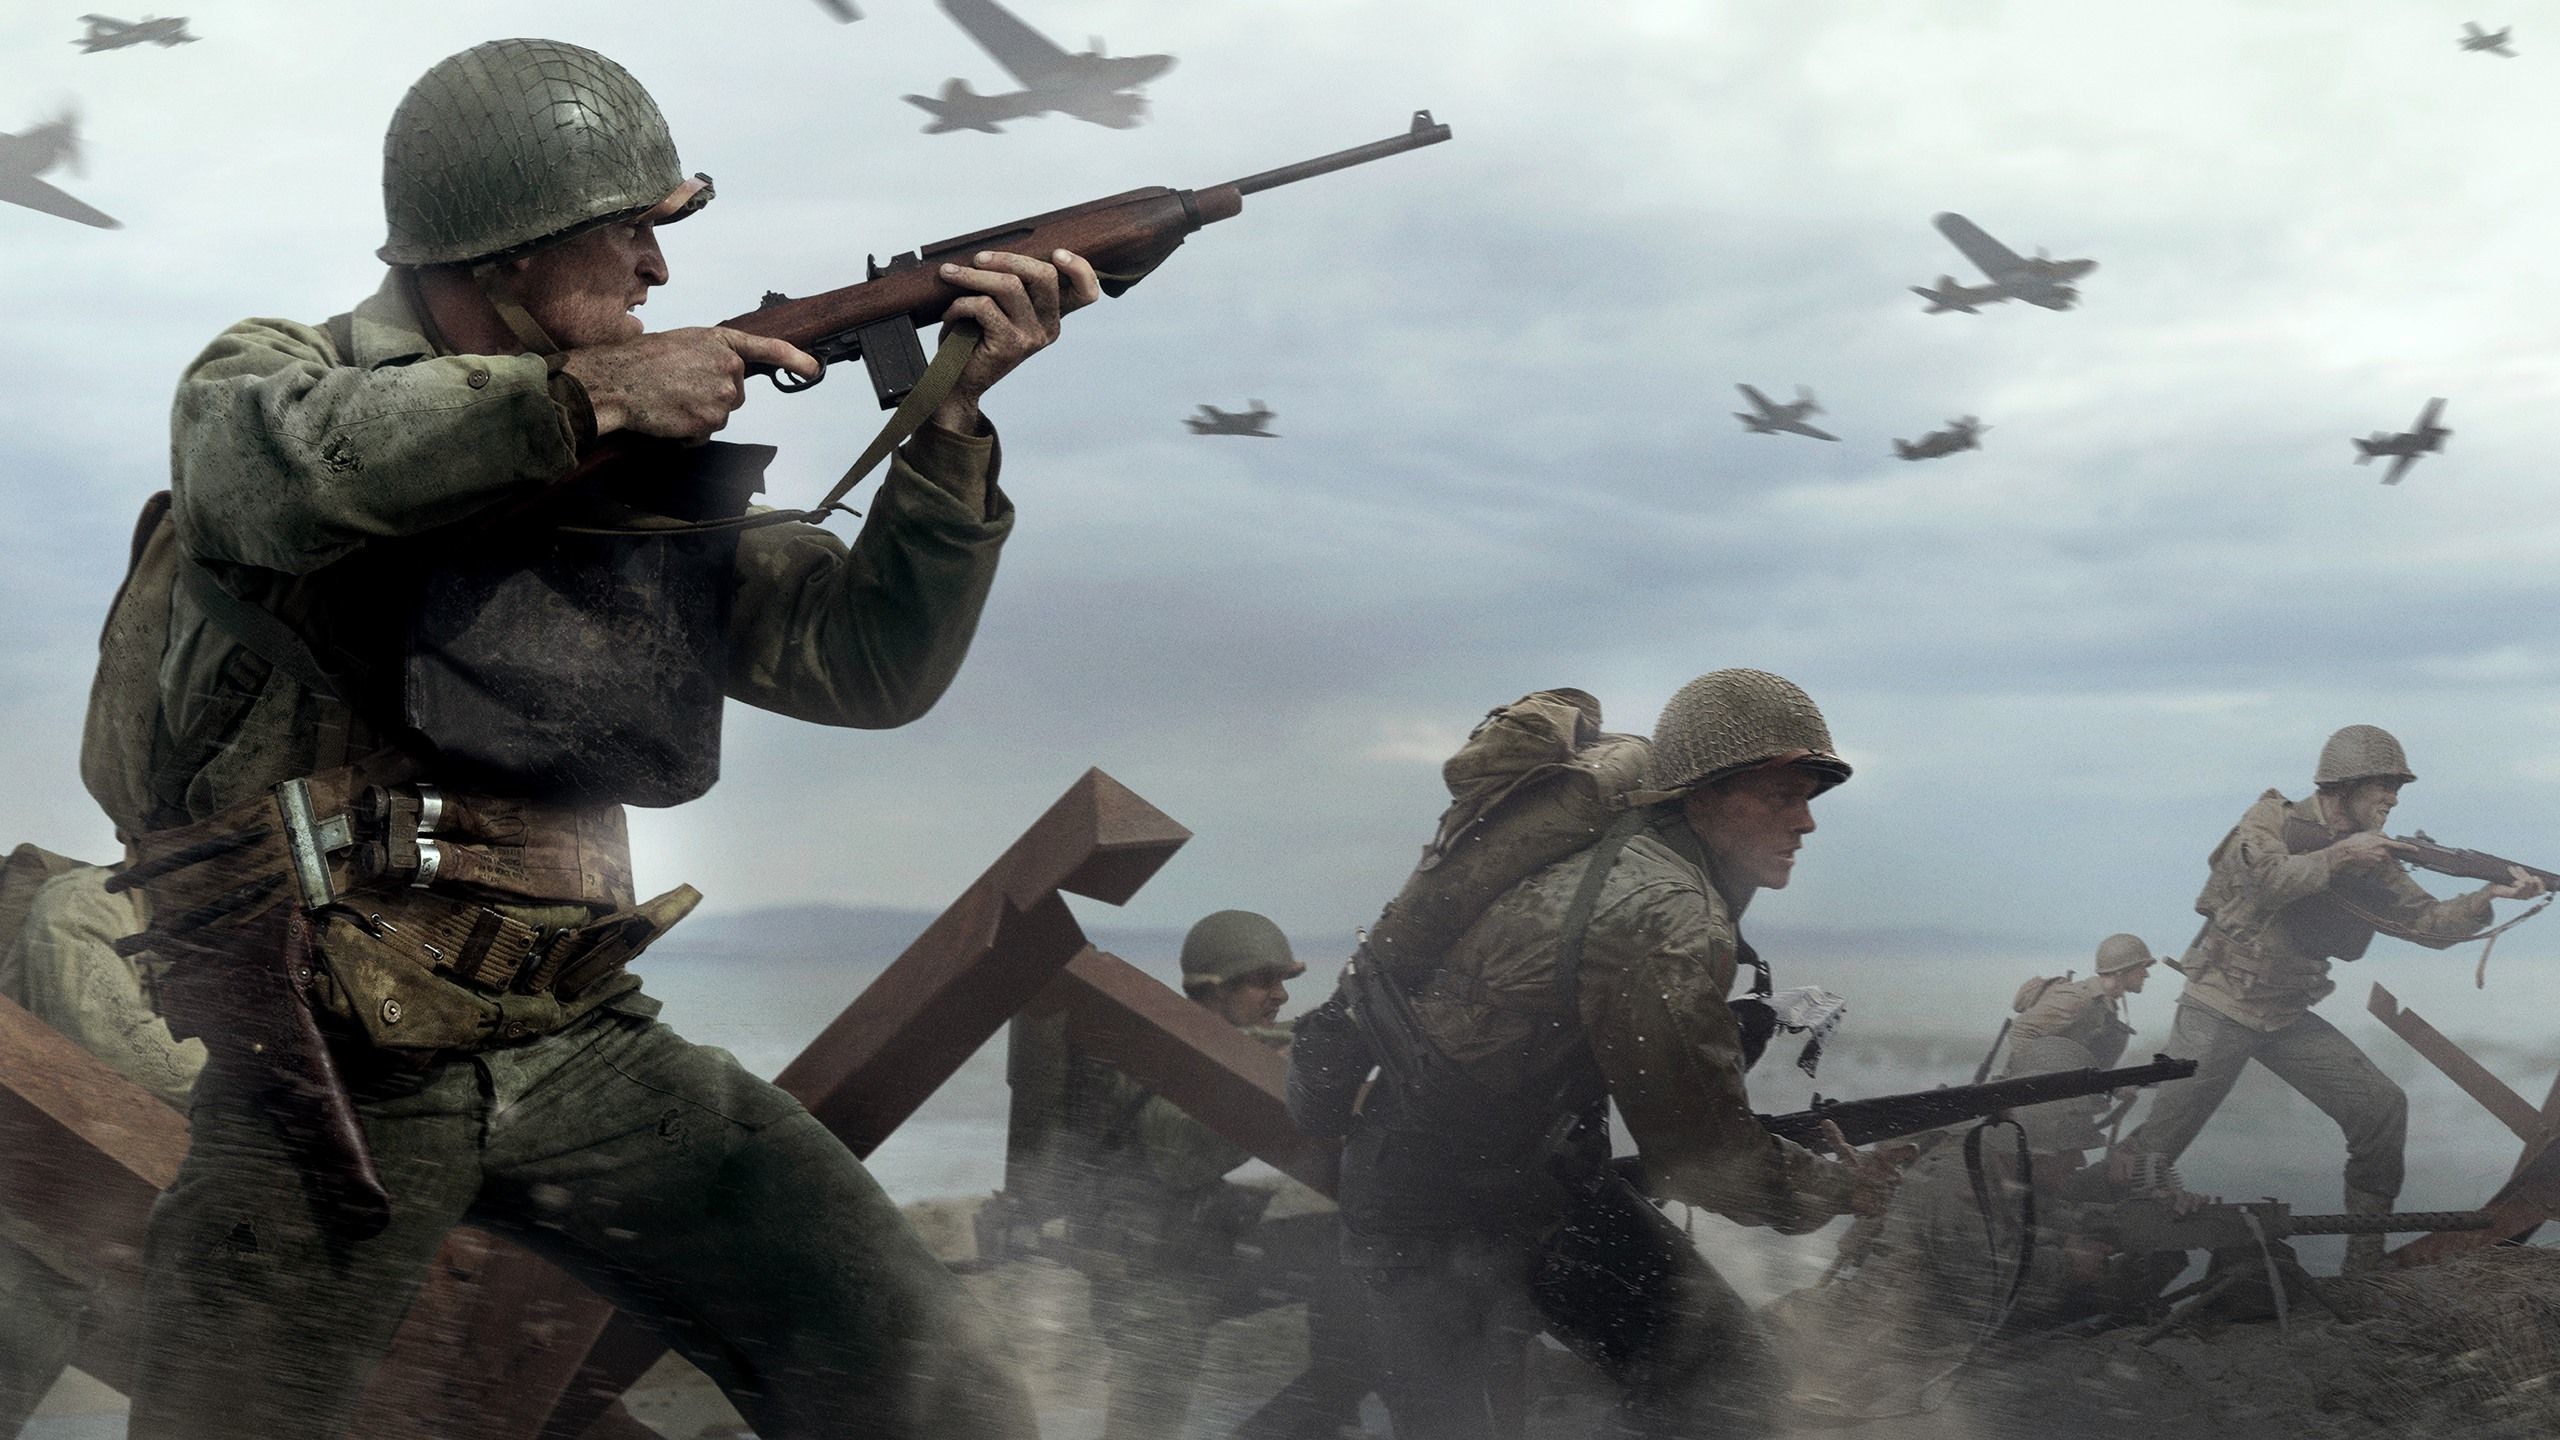 2560x1440 Awesome Call of Duty: WWII Soldiers in War wallpaper